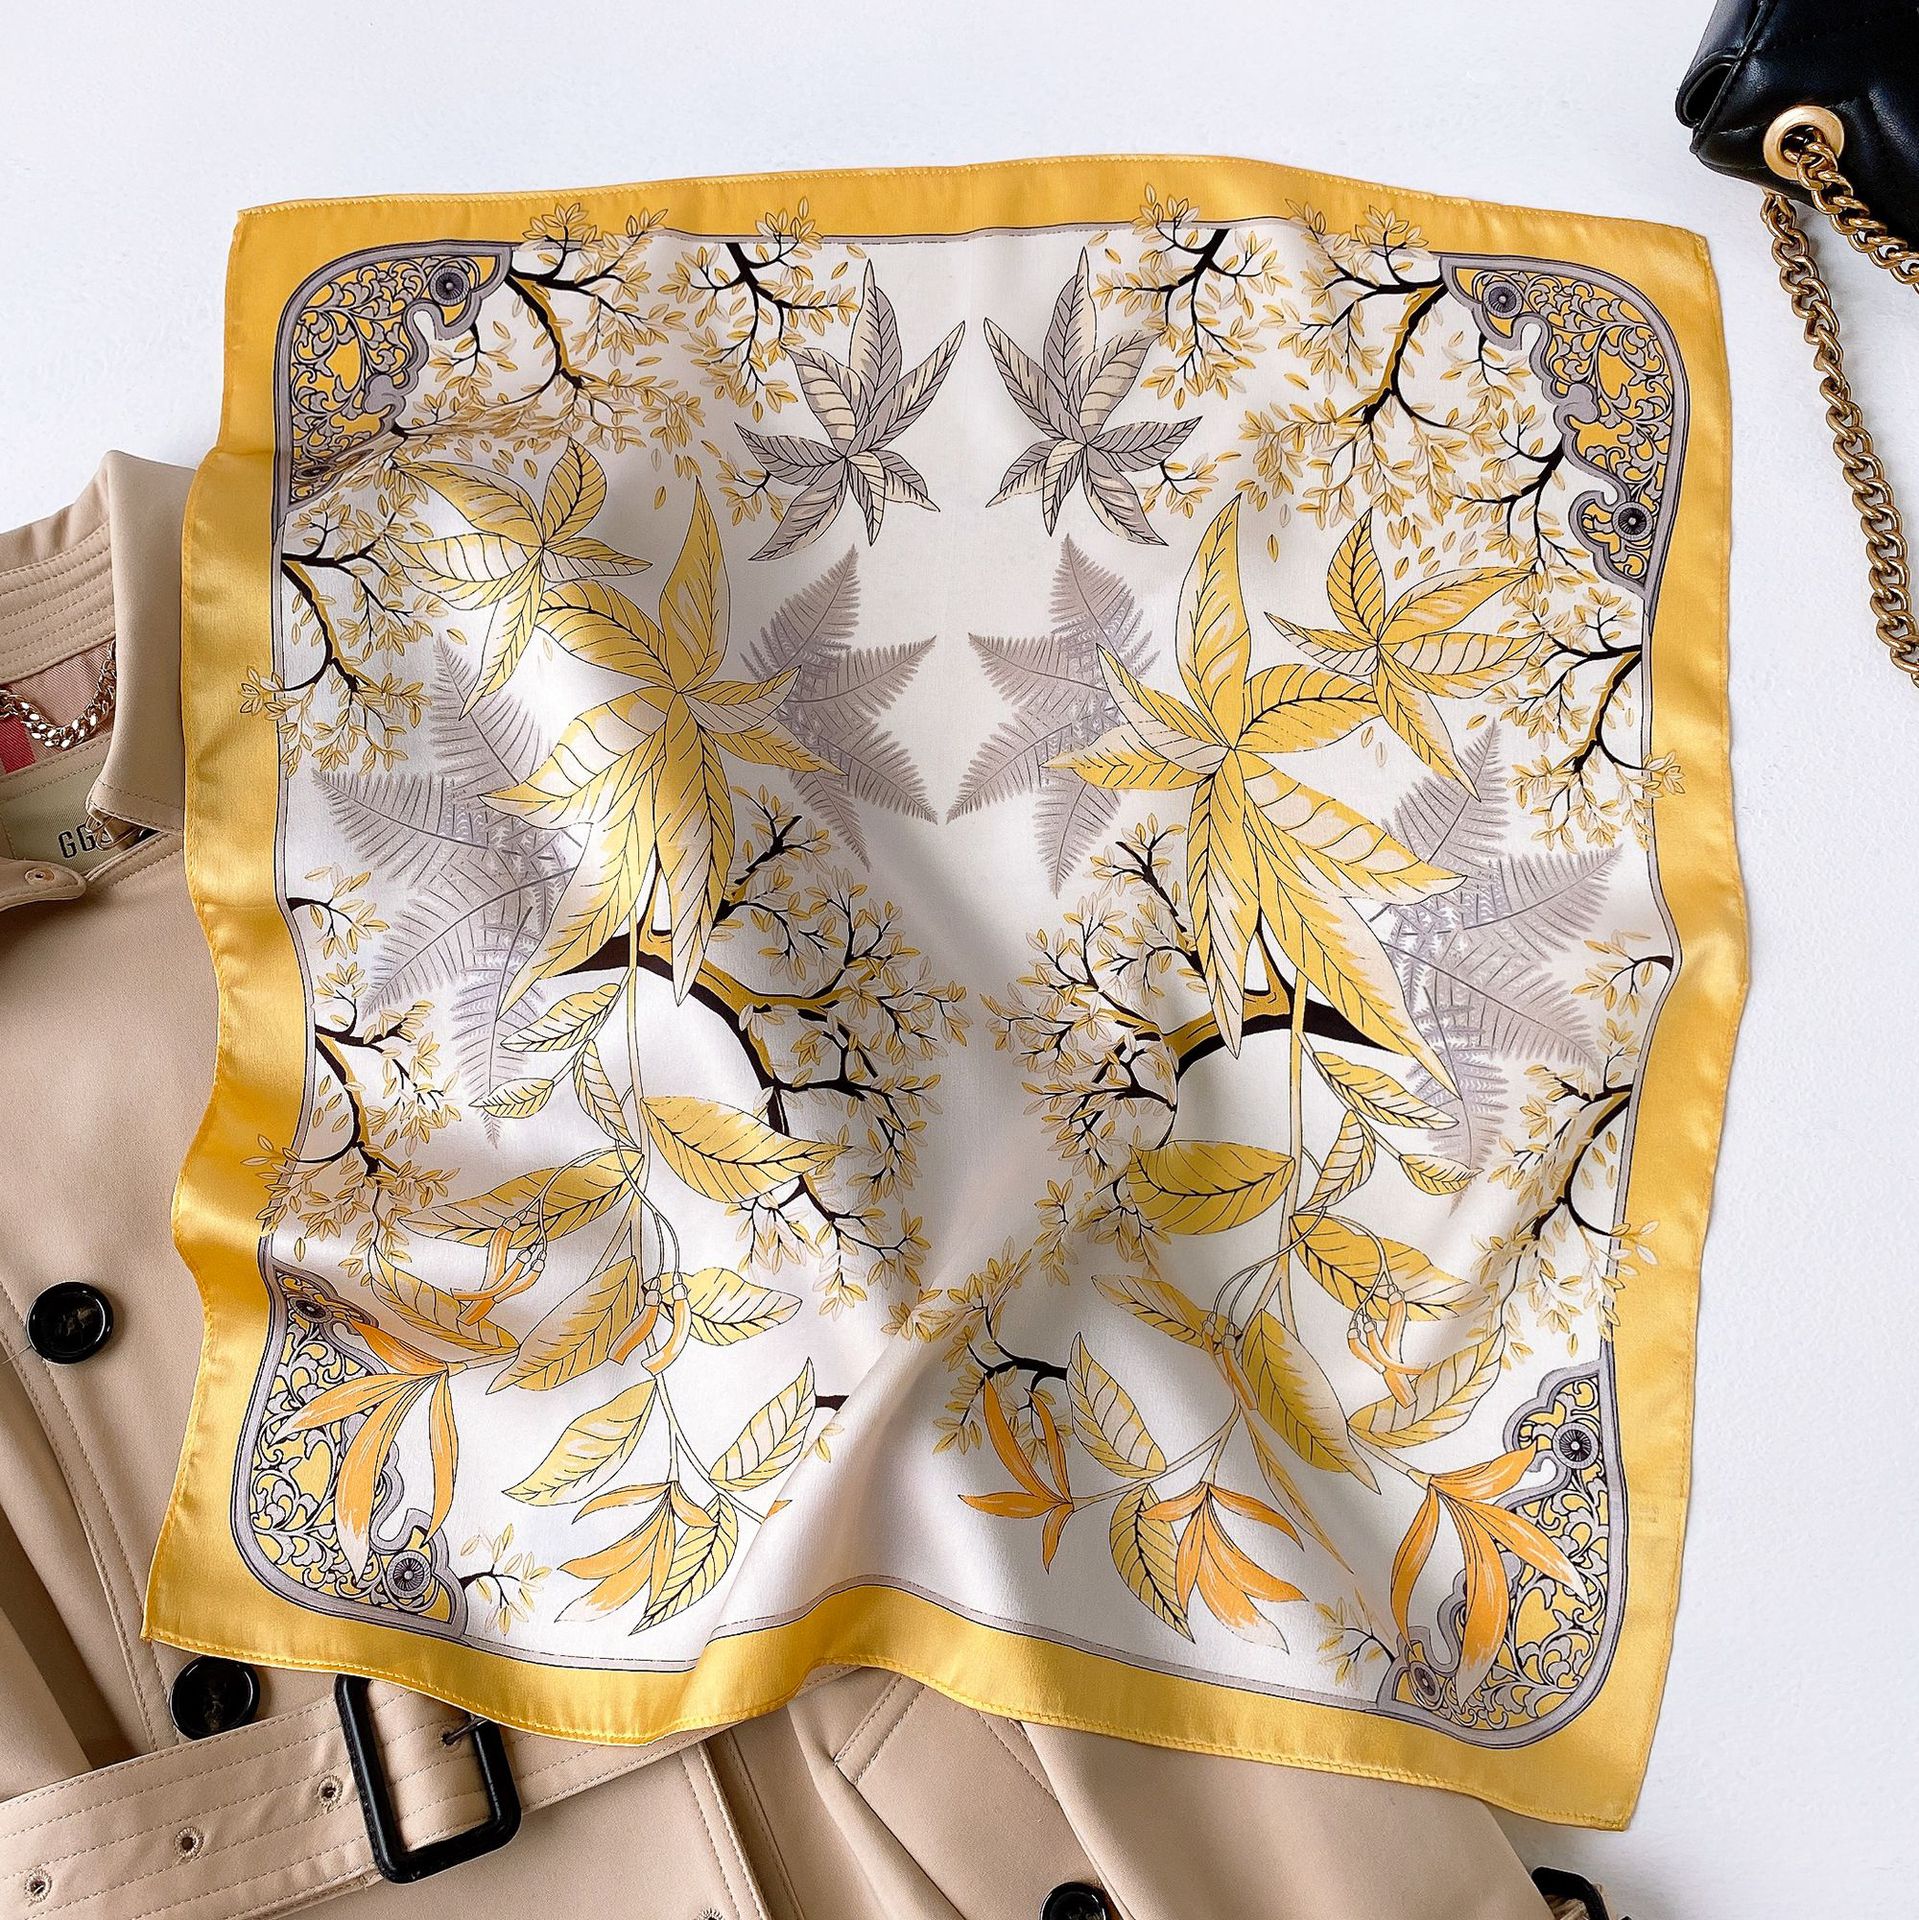 

New Silk Scarf Small Scarf Female Mulberry Silk Floral Printing Popular Small Square Towel Hair Band Tied Gro-Bag Scarf No. 5